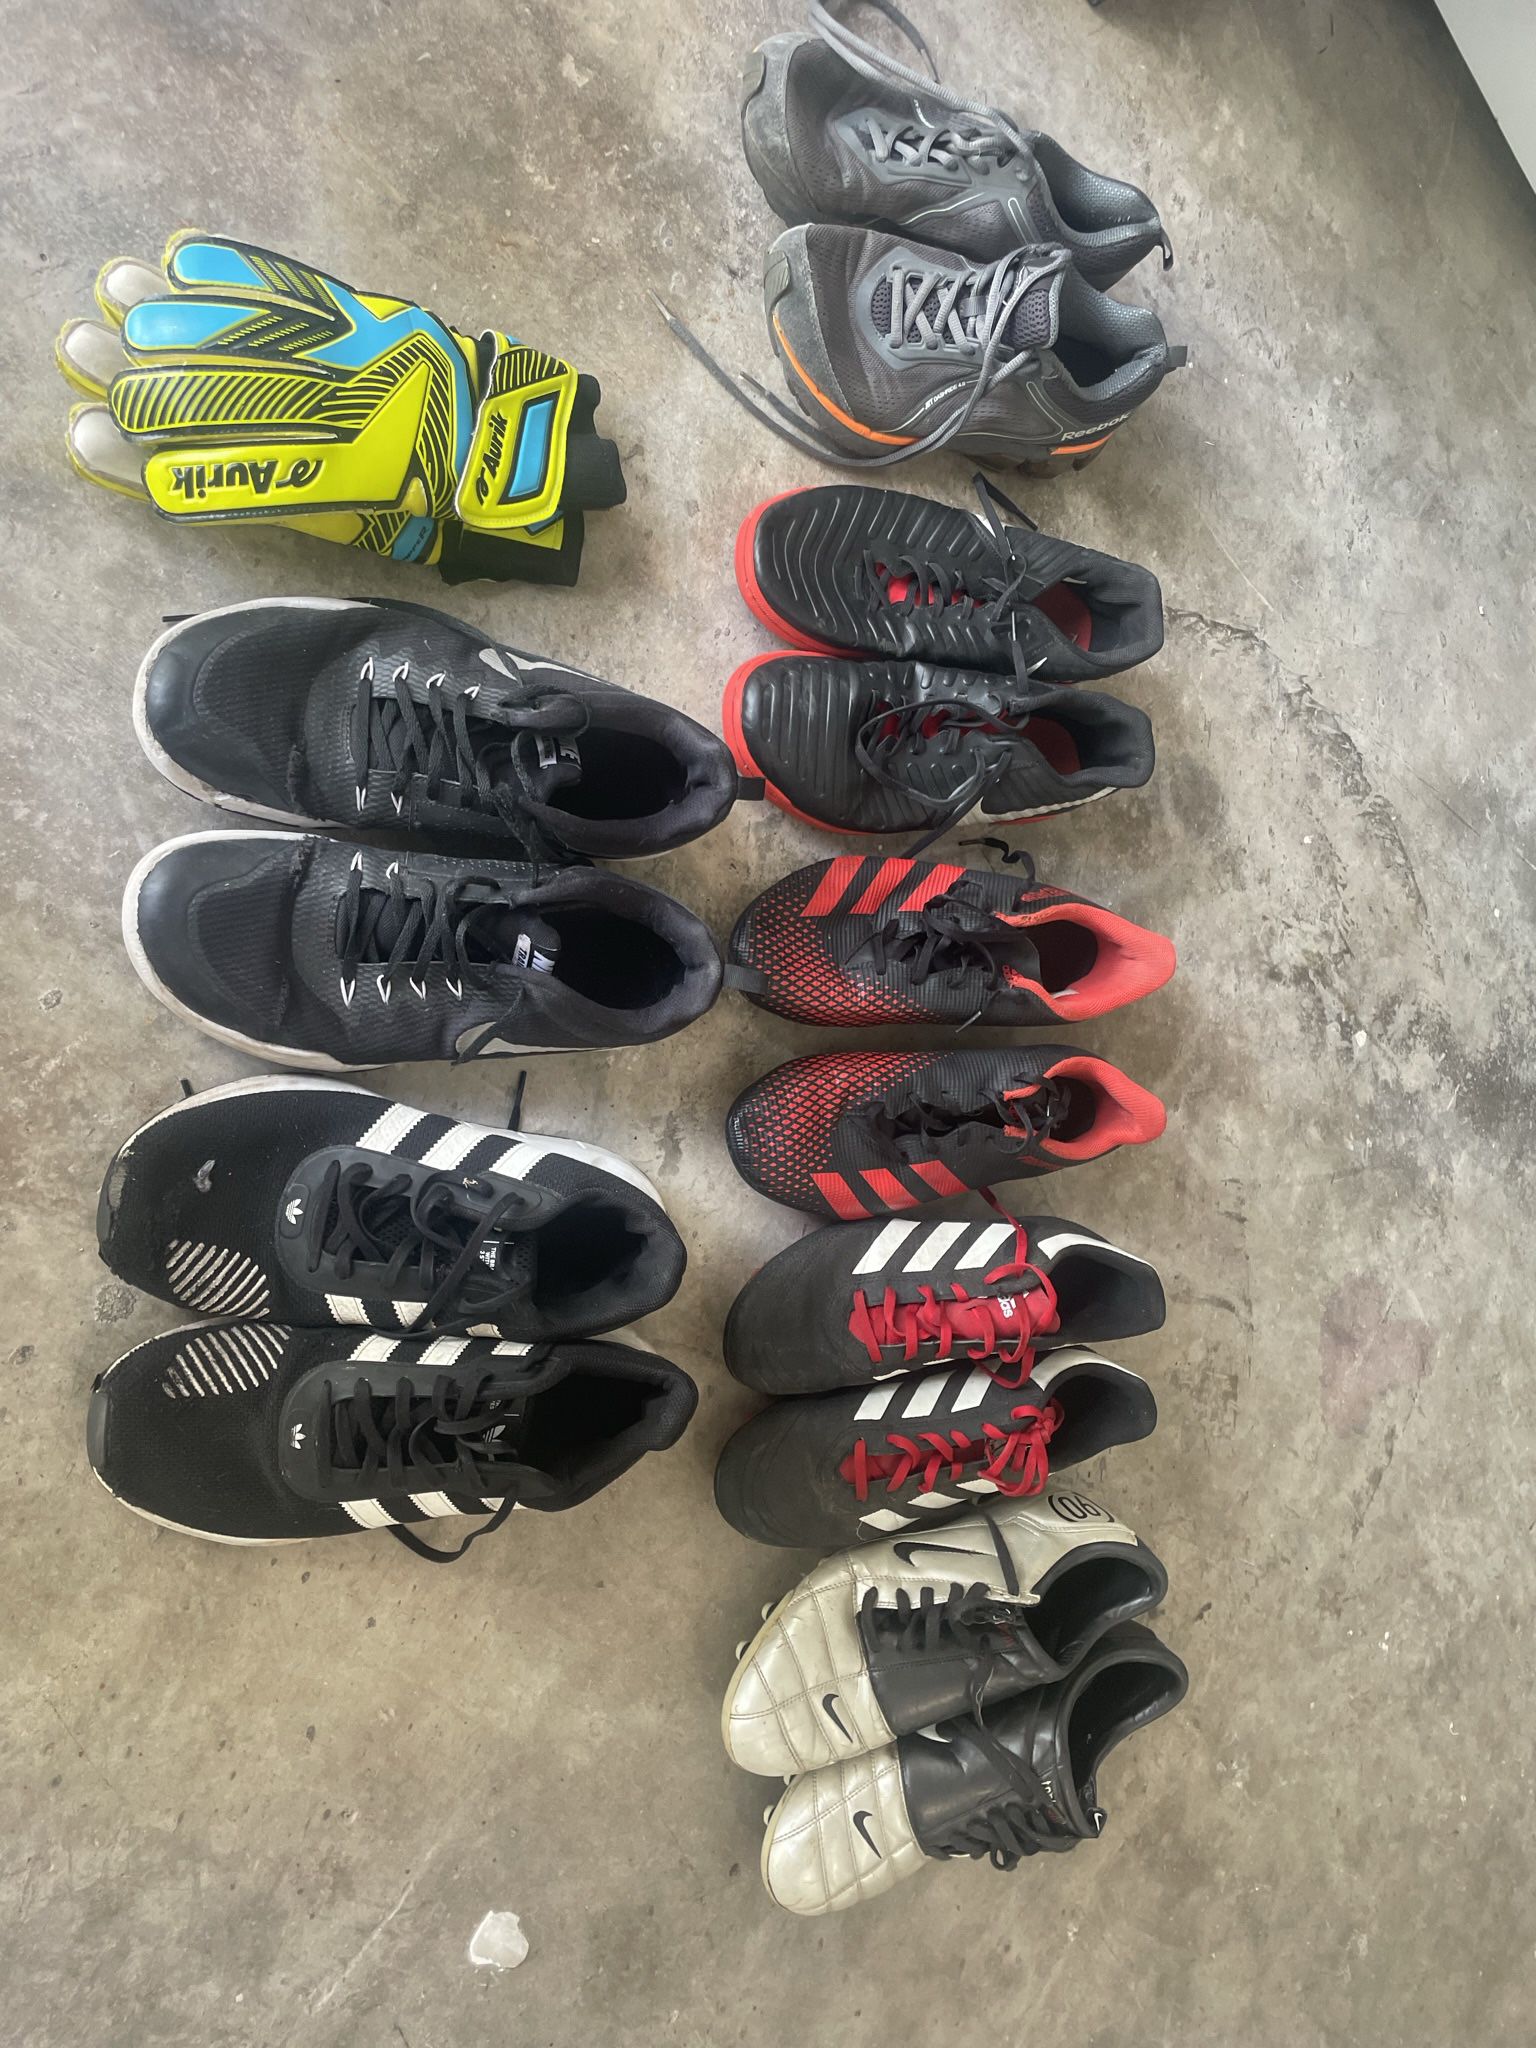 Soccer Cleats & Running Shoes